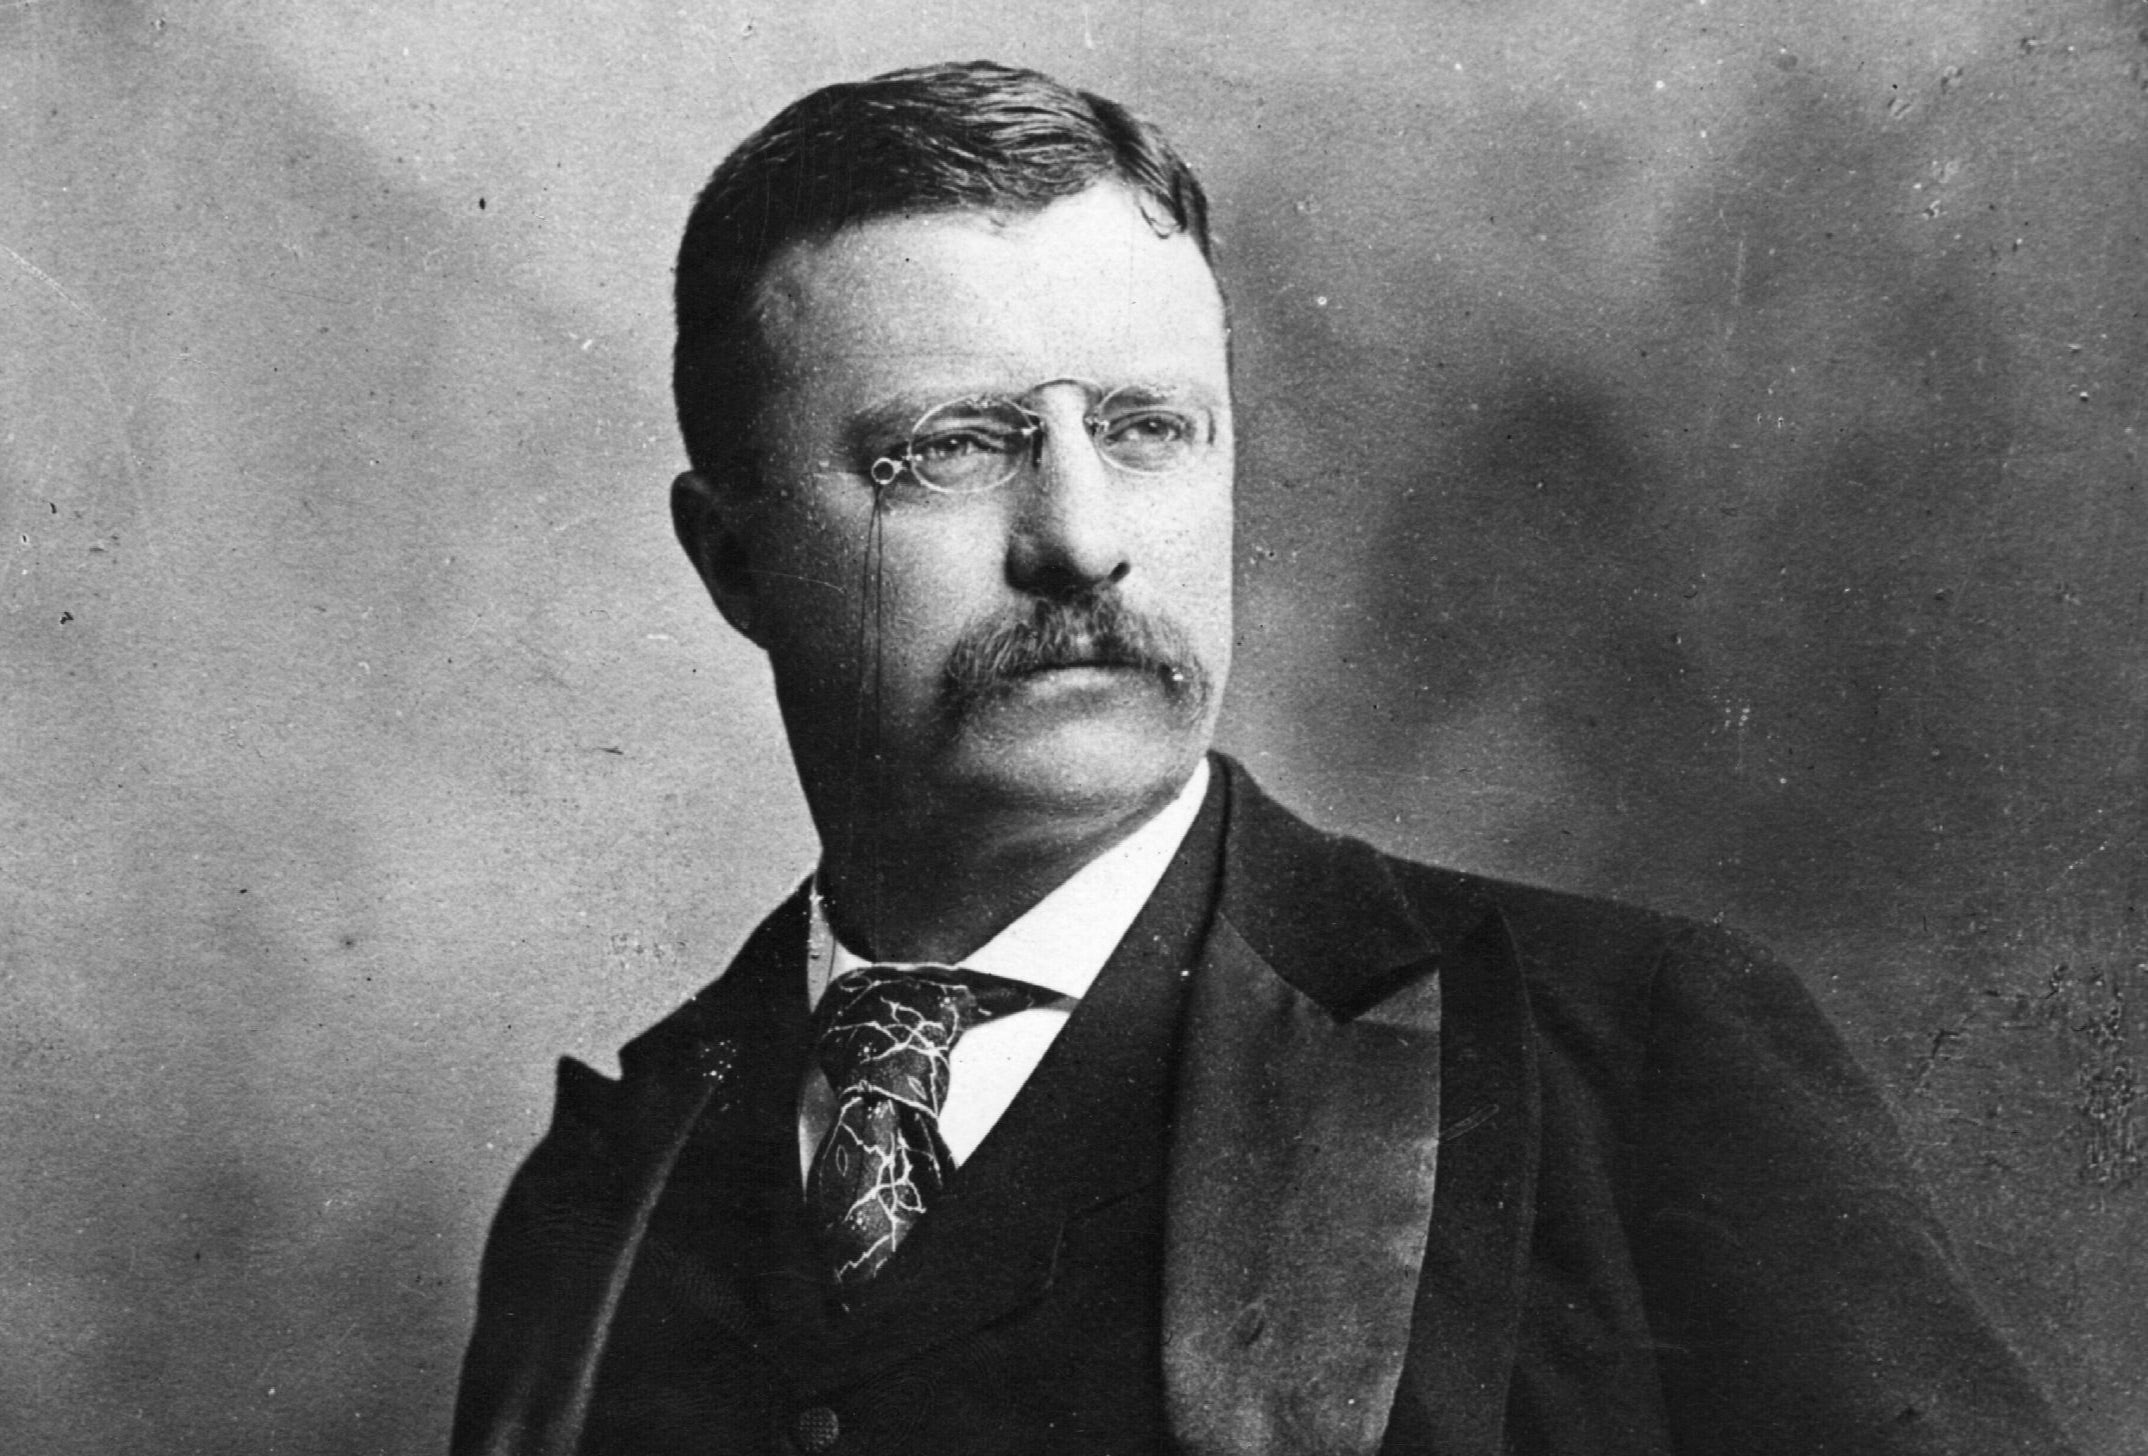 LEADERSHIP LESSONS FROM FOUR AMERICAN PRESIDENTS: Theodore Roosevelt (Part II)